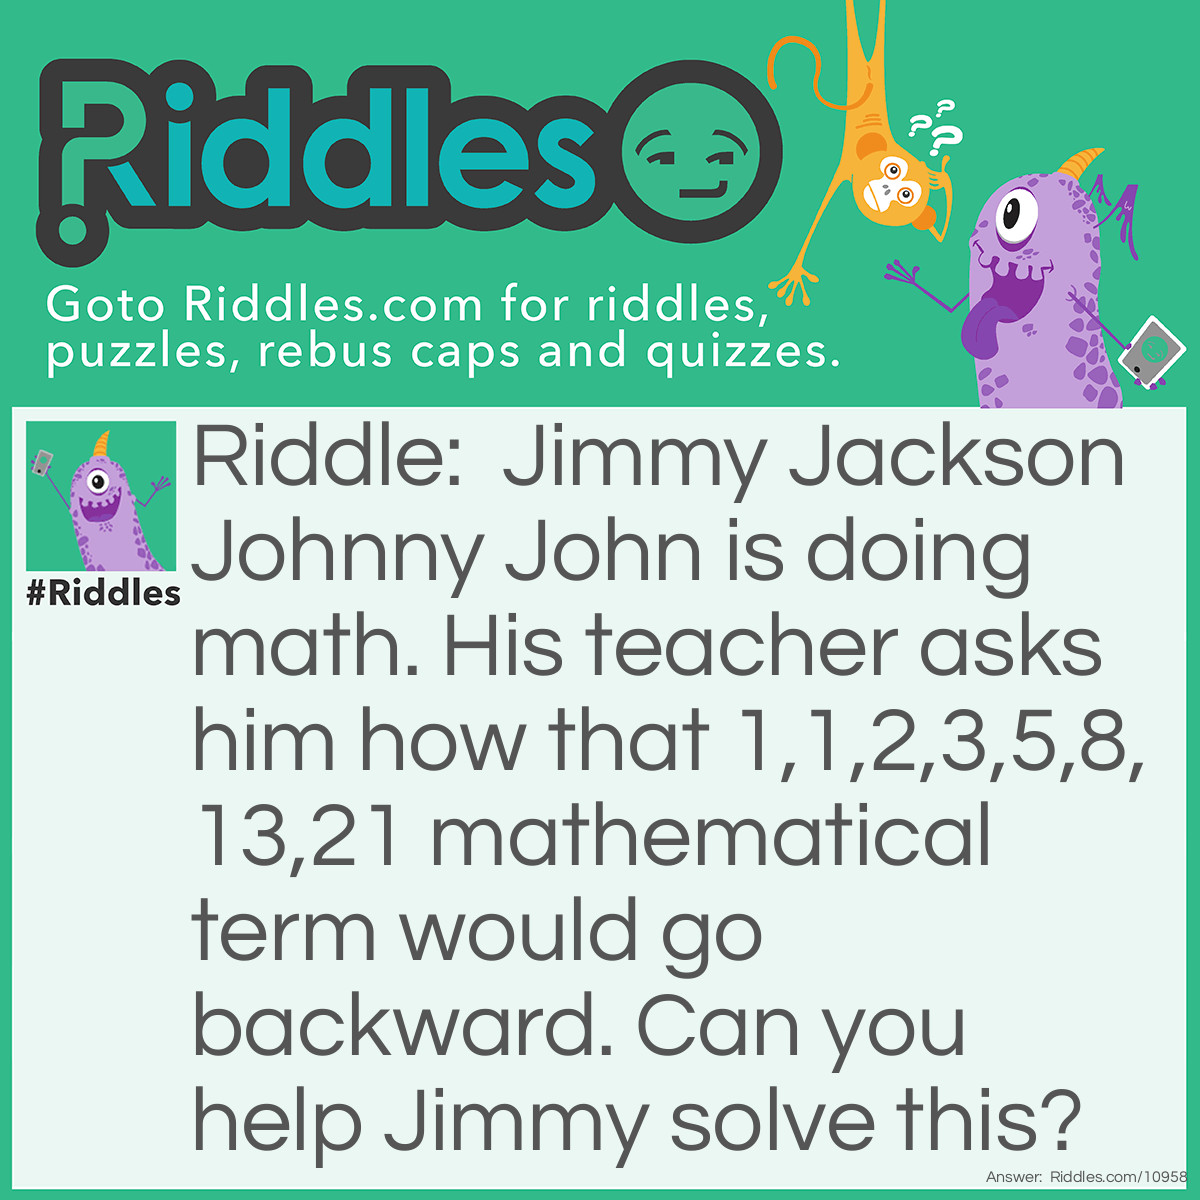 Riddle: Jimmy Jackson Johnny John is doing math. His teacher asks him how that 1,1,2,3,5,8,13,21 mathematical term would go backward. Can you help Jimmy solve this? Answer: This is impossible for the most part. The pattern would just go Infinity, Infinity, Infinity and so on.